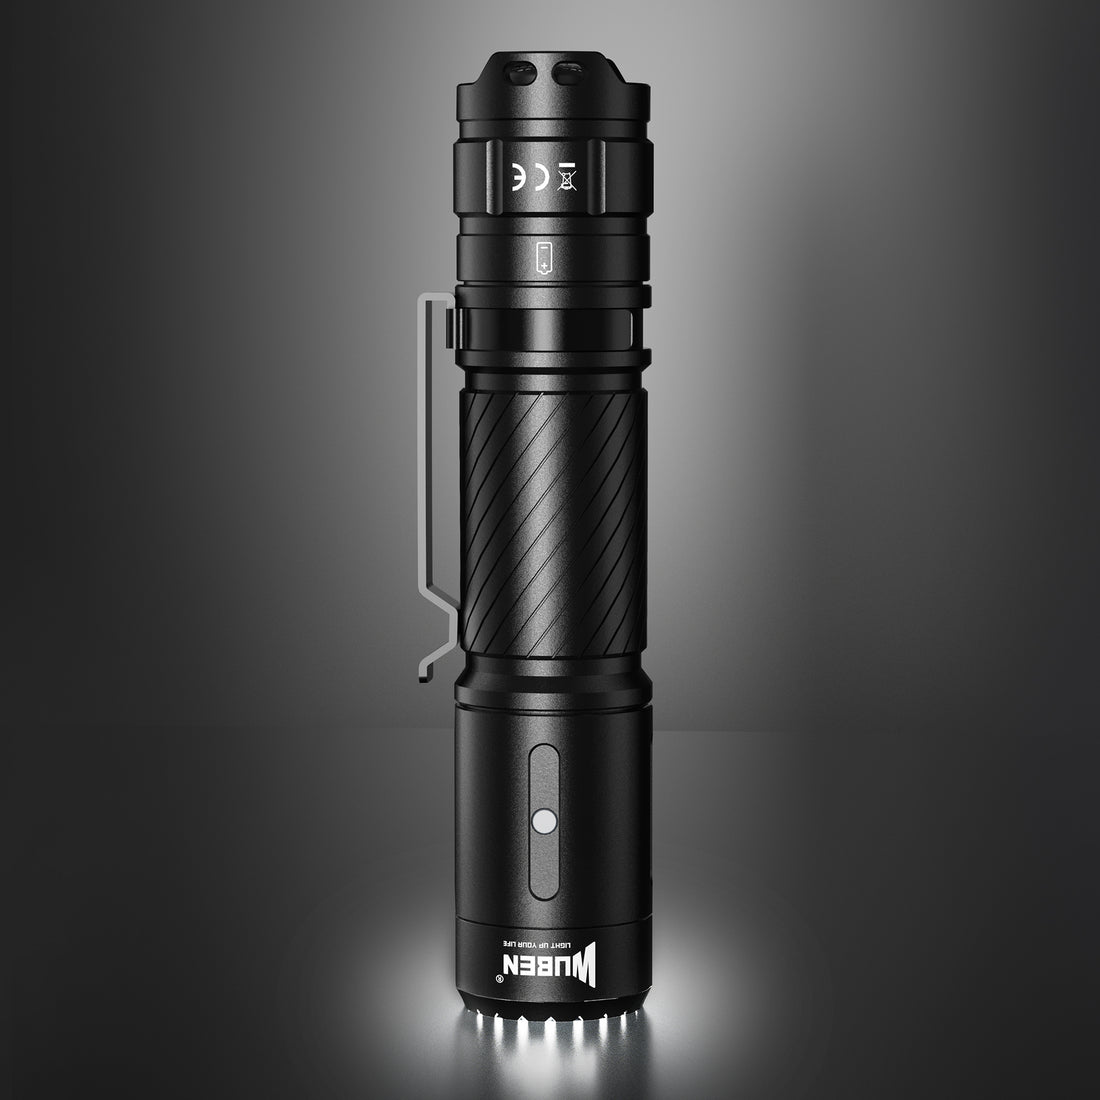 Product Spotlight: C3 Flashlight - A Powerful and Reliable Lighting Solution